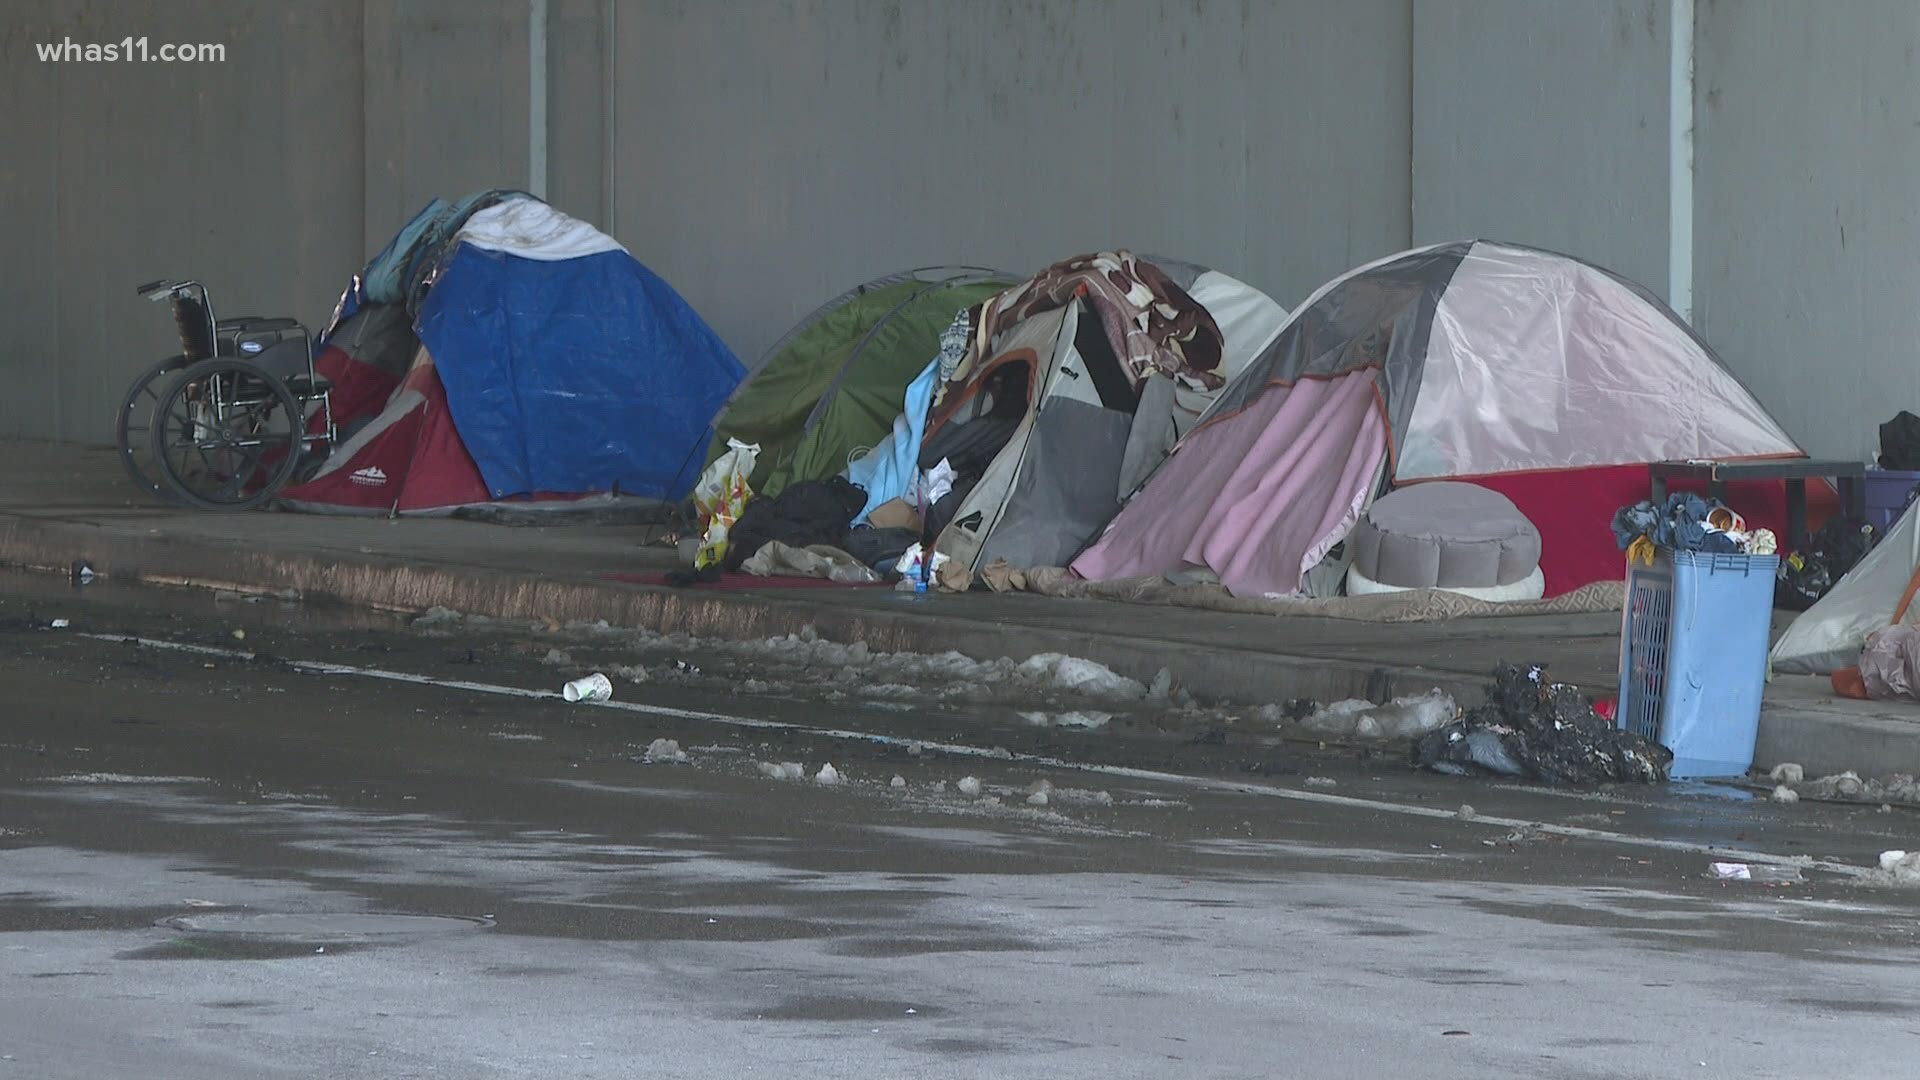 LMPD issued a formal apology today after they say a miscommunication led them to clear a homeless camp without notice.